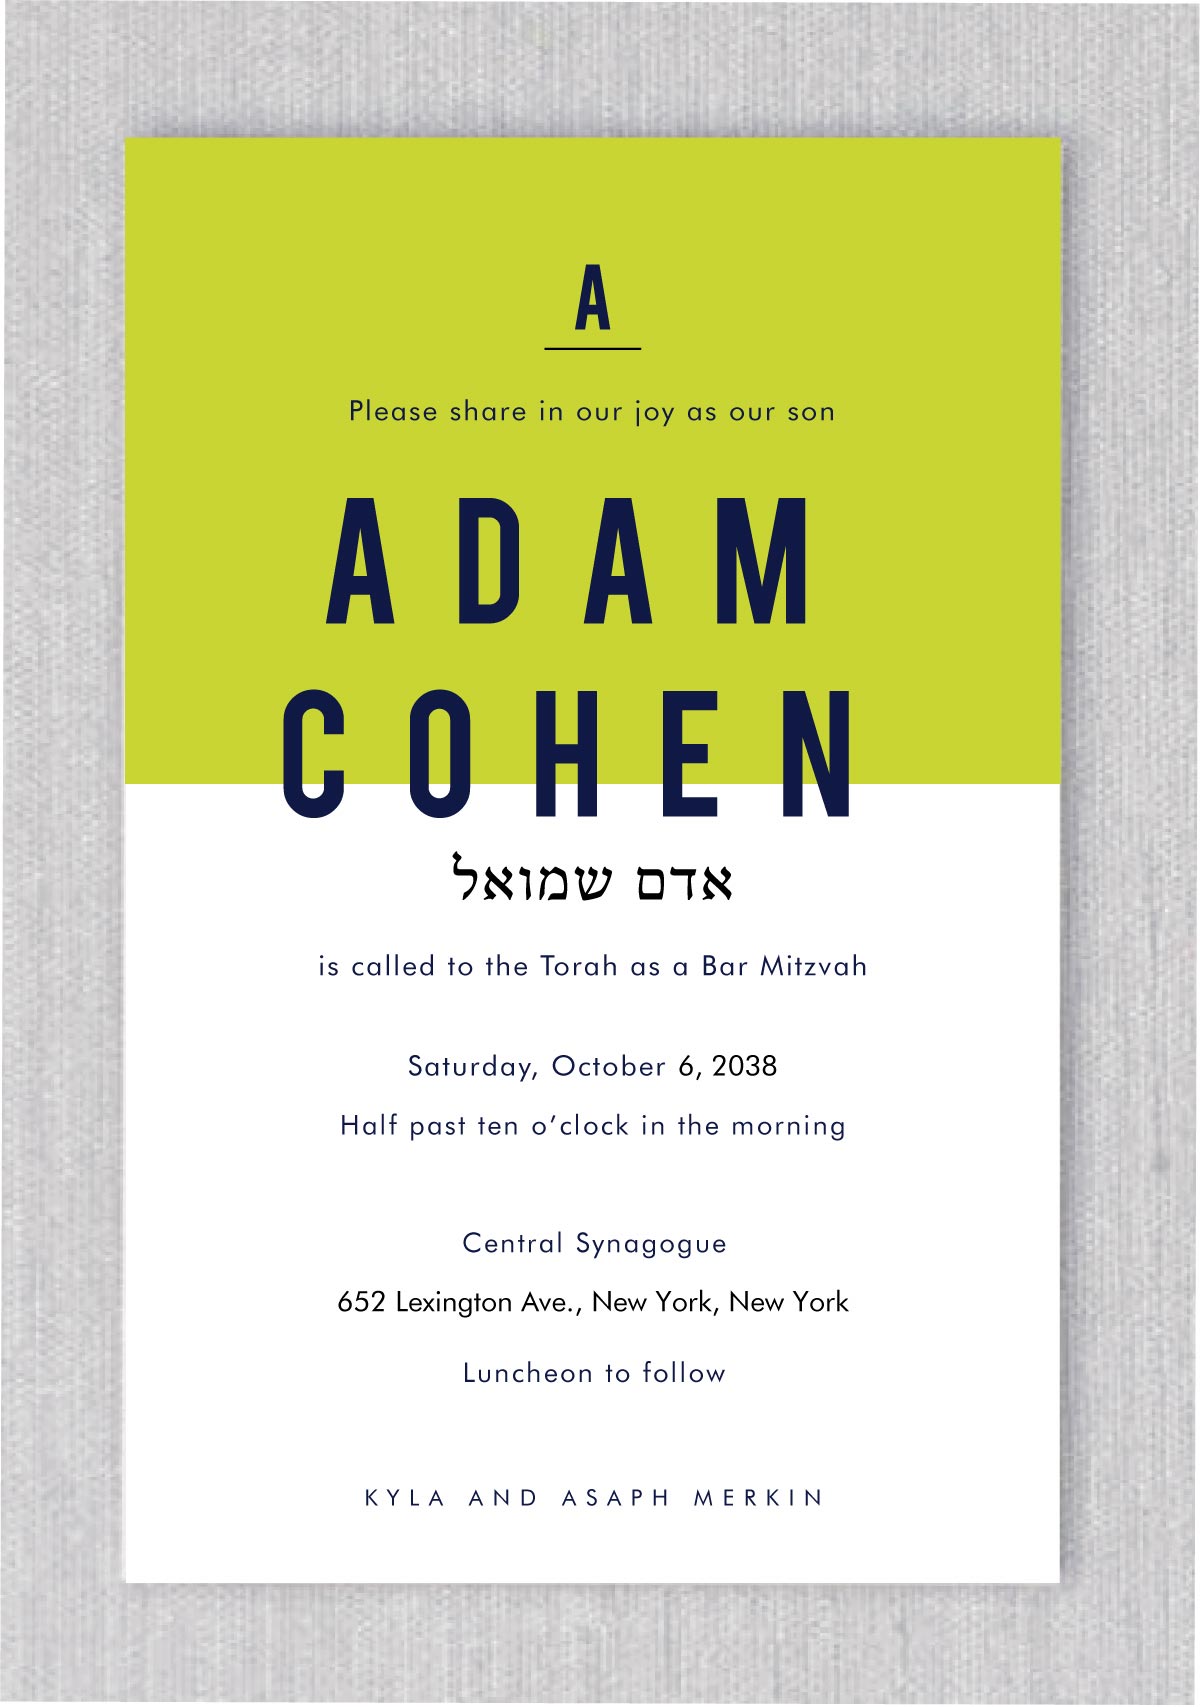 The Simple Block Bar Mitzvah invitation is a stunning and one-of-a-kind invitation featuring a vibrant green neon block that adds a pop of color and style. The name is prominently displayed in large, bold lettering, making a bold statement and emphasizing the special occasion. And the best part? You can coordinate your entire celebration details with matching RSVP cards, and thank you notes, ensuring a cohesive and polished look.